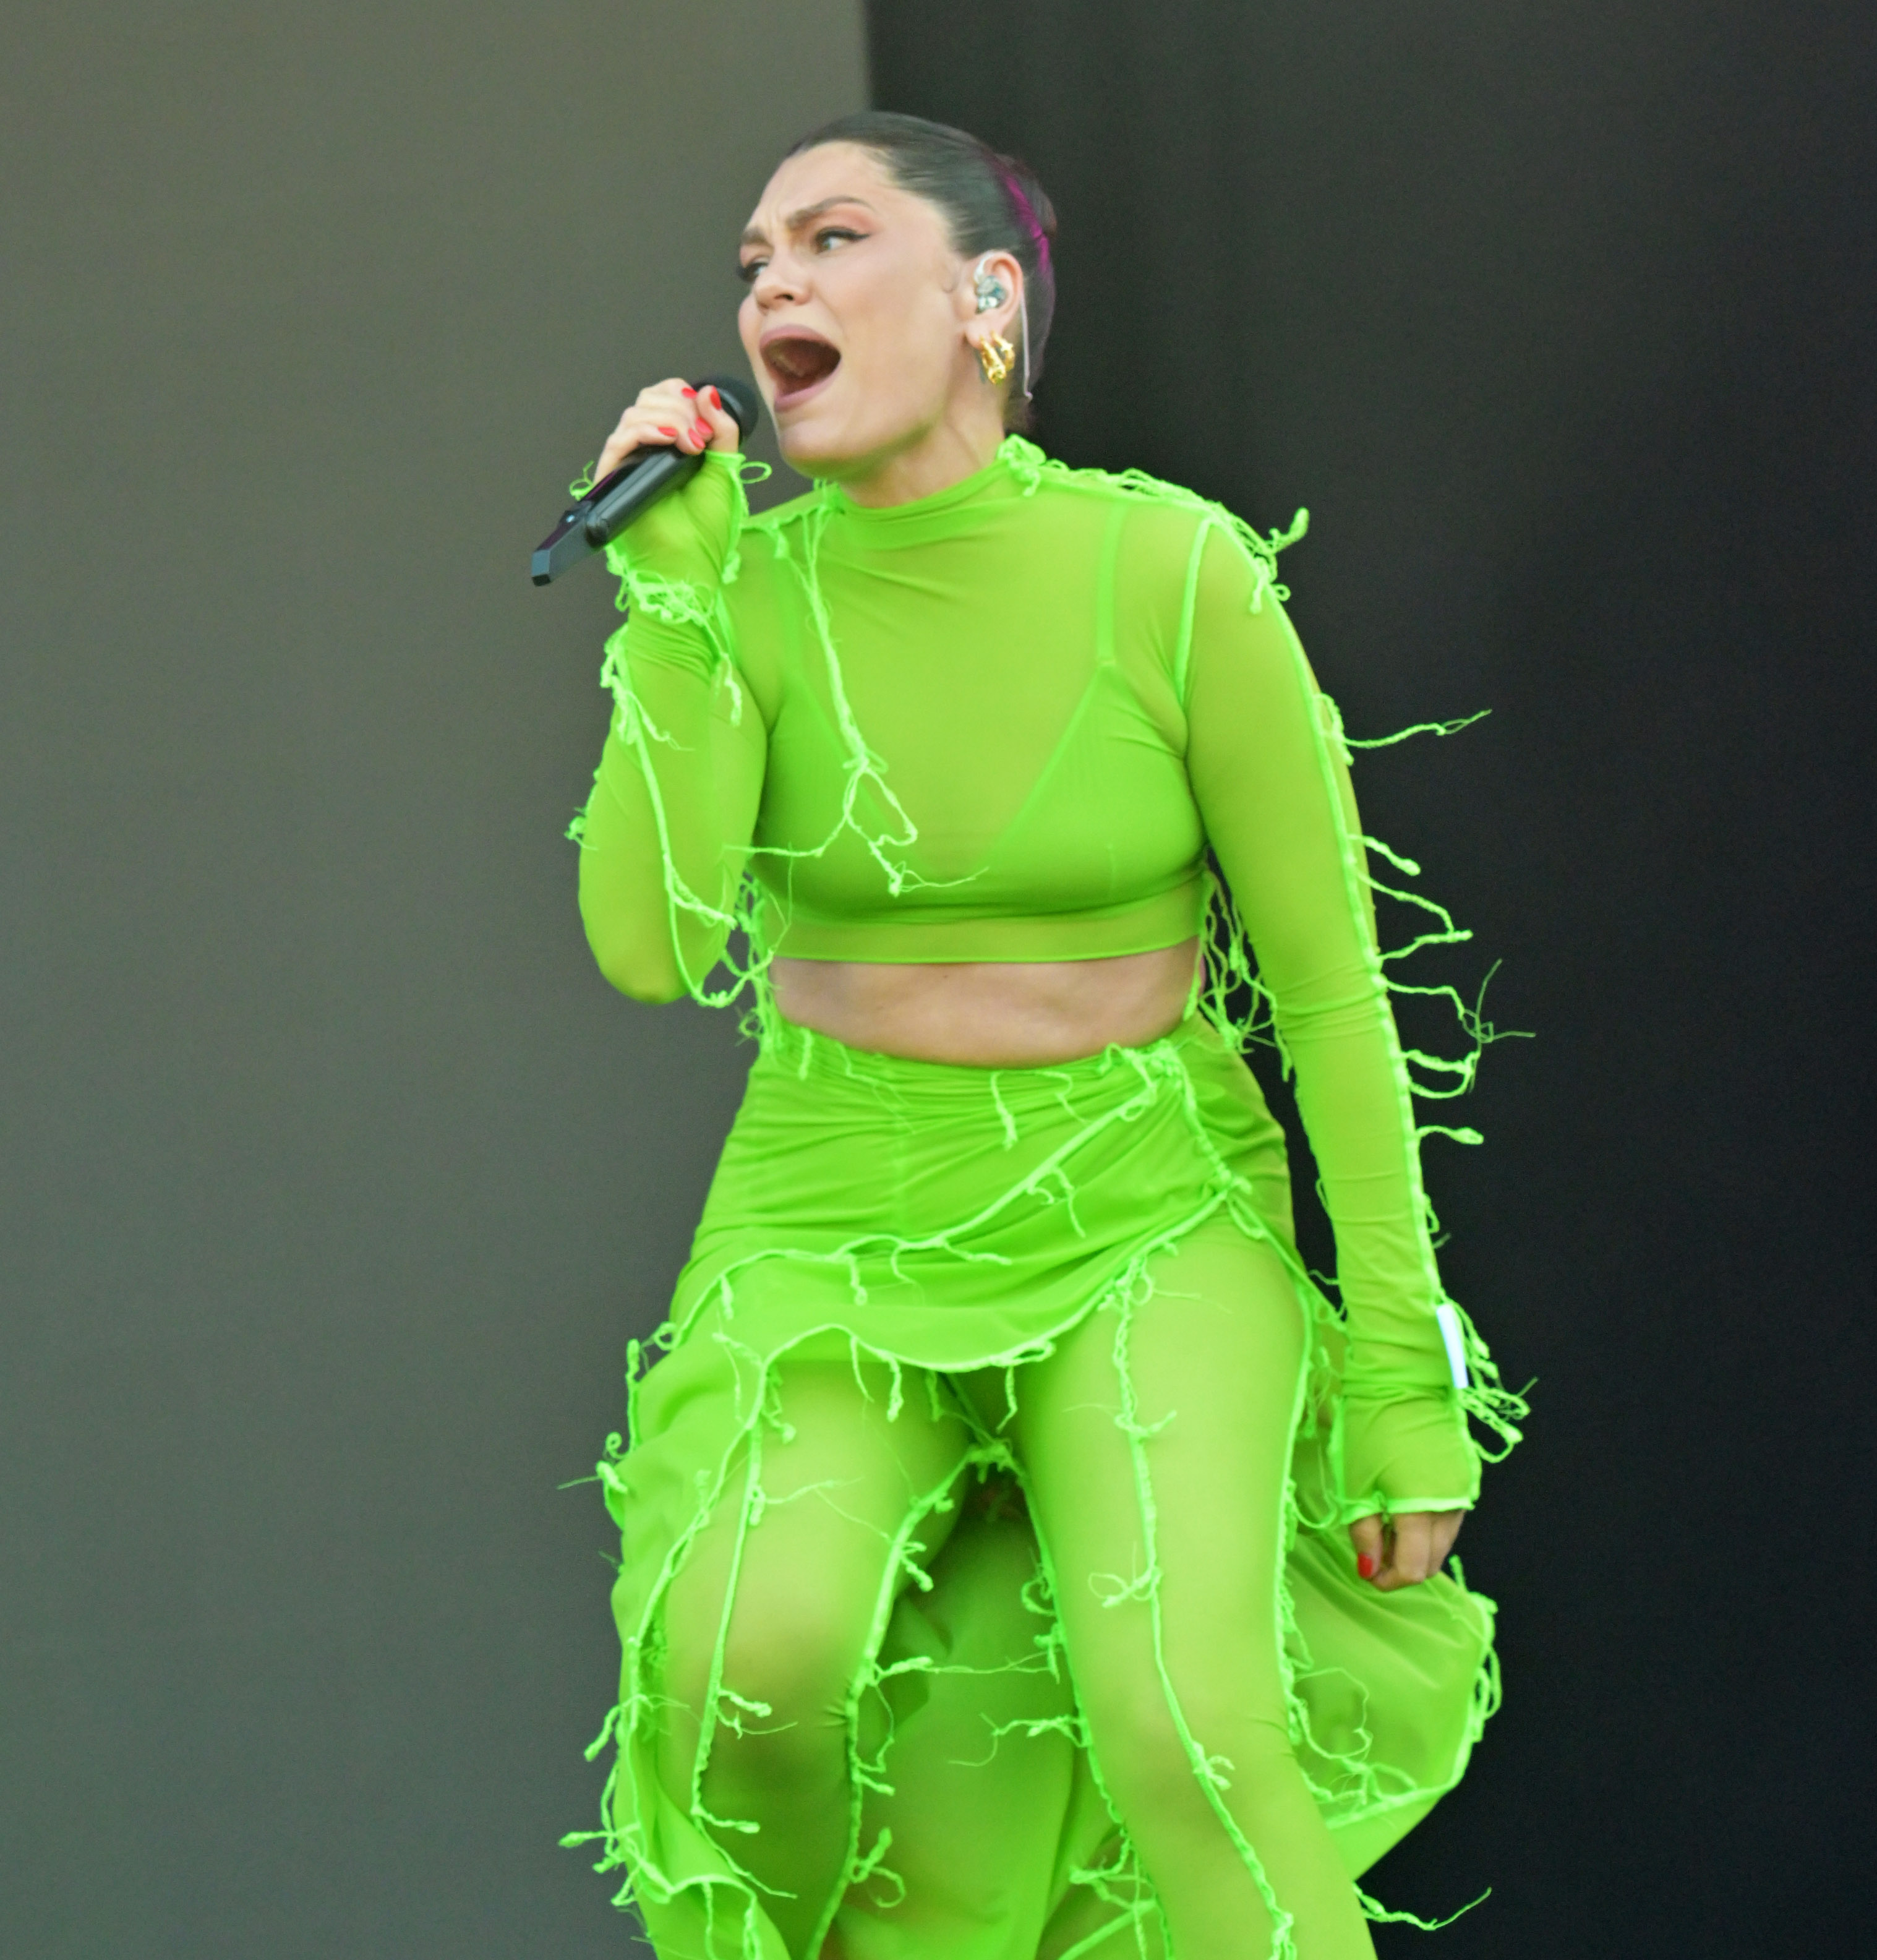 And Jessie J wore this neon-green sheer outfit on stage